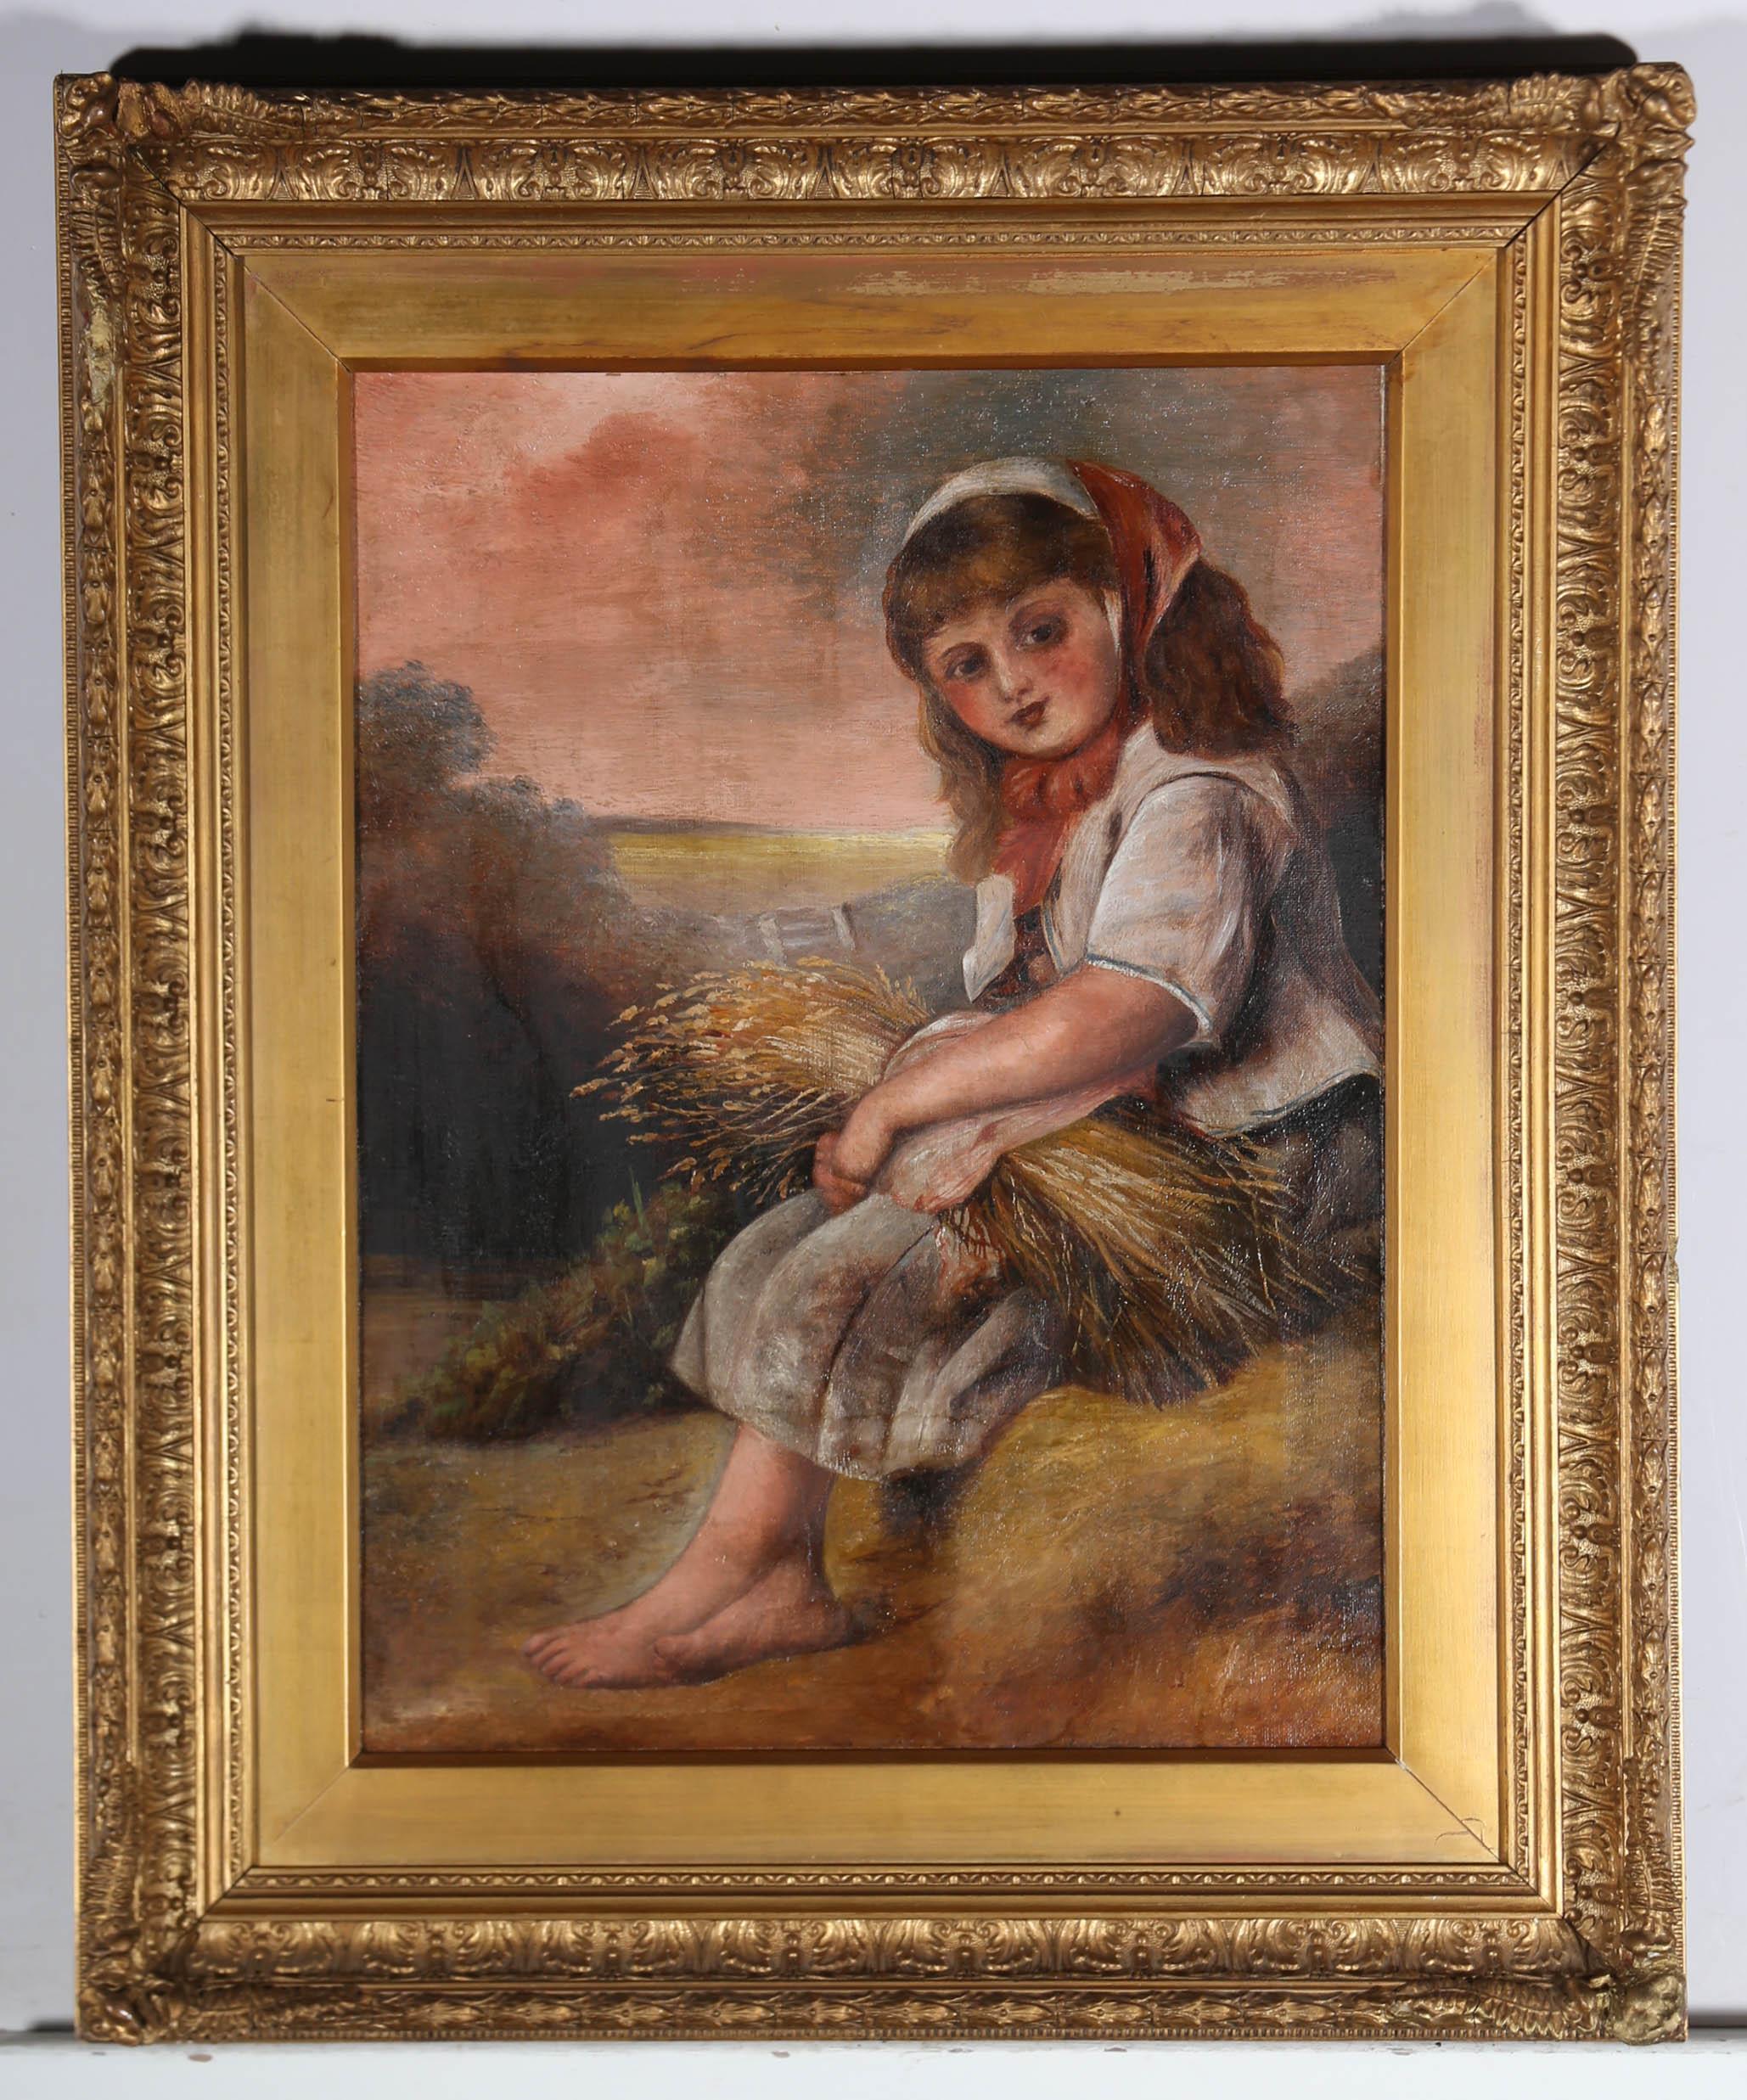 A delightful portrait depicting a young girl in a pastoral setting. He clutches her gathered wheat in her lap as proof of her days work as the sun begins to set on the horizon. The artist captures the scene in a naïve style in charming but